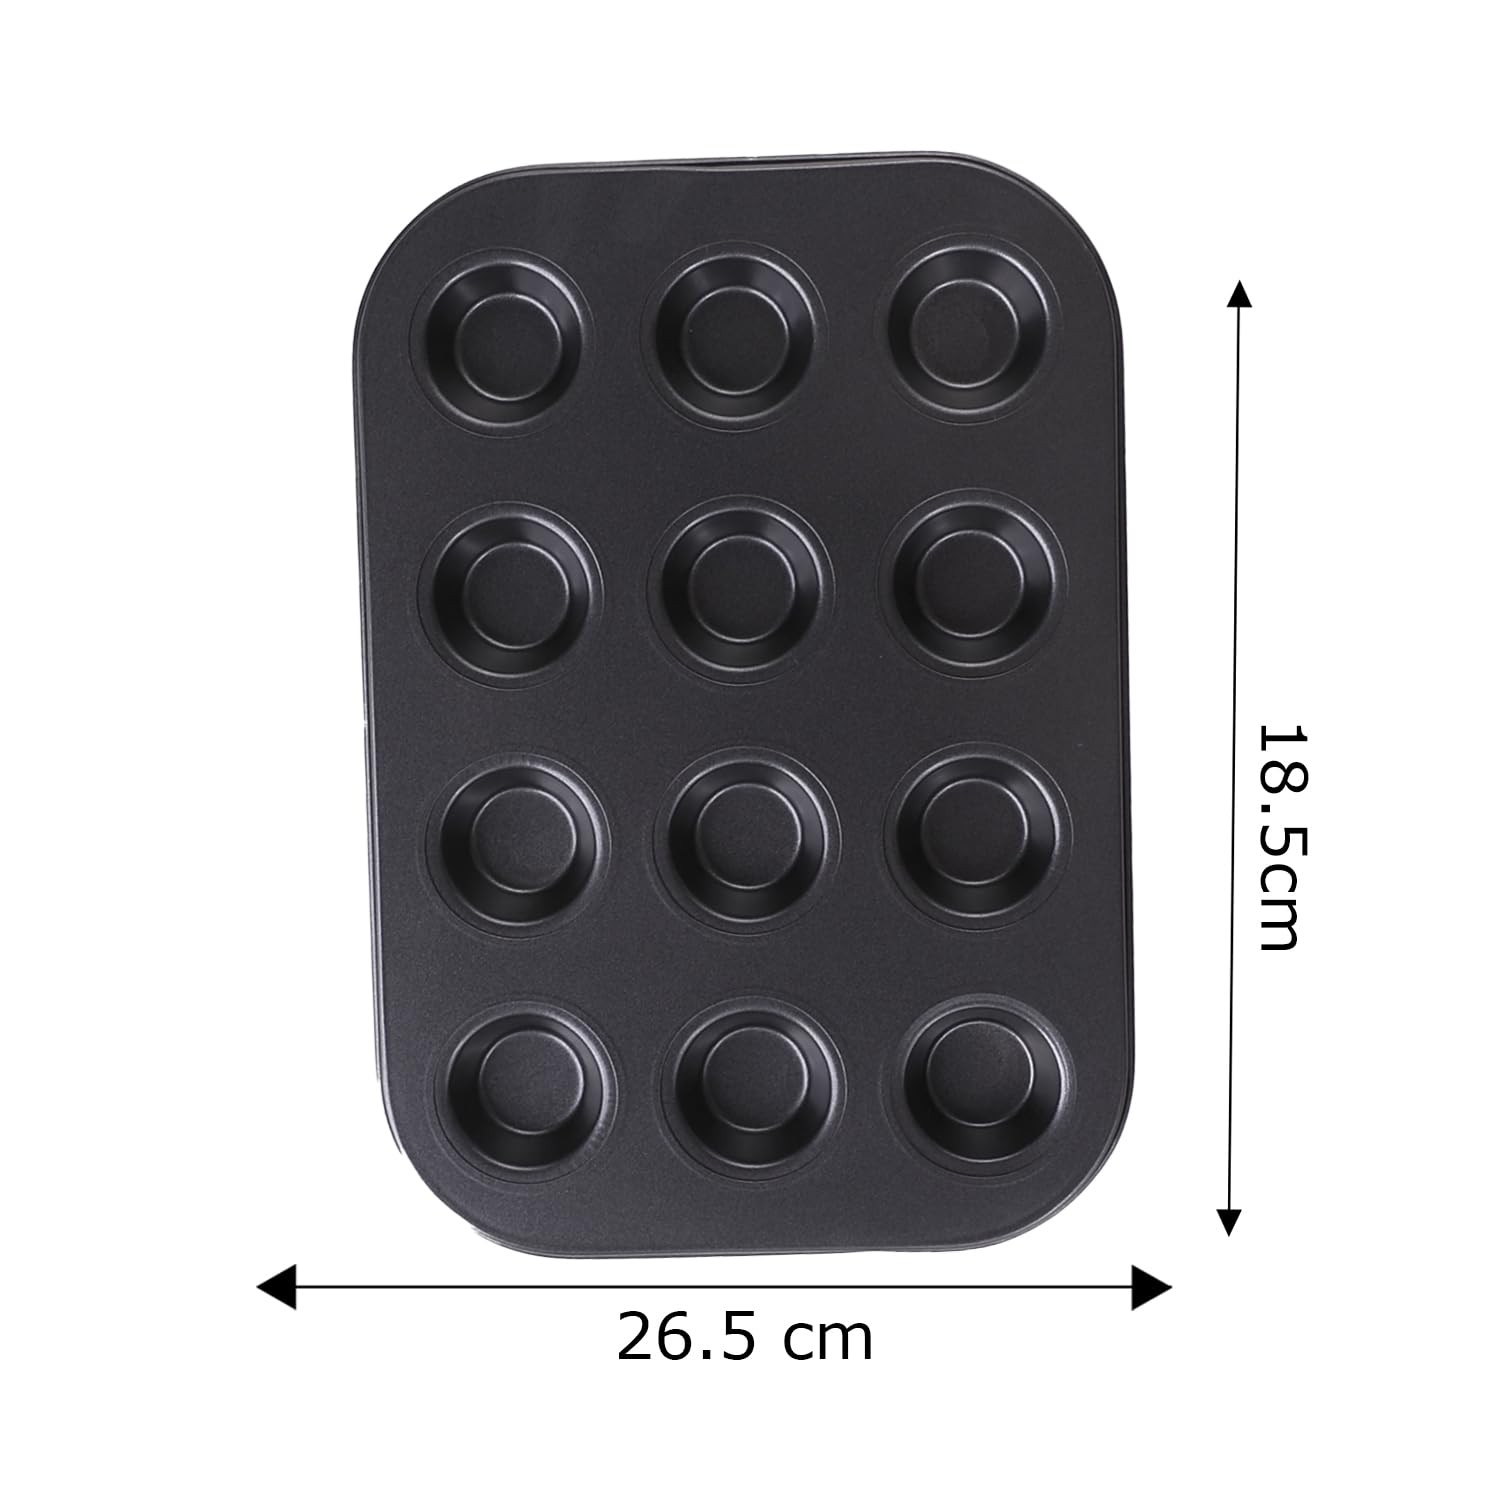 Kuber Industries 12 Slots Non-Stick Cup Cake Tray|Cup Cake Mould for Baking|Idol for Muffin, Small Cake (Black)